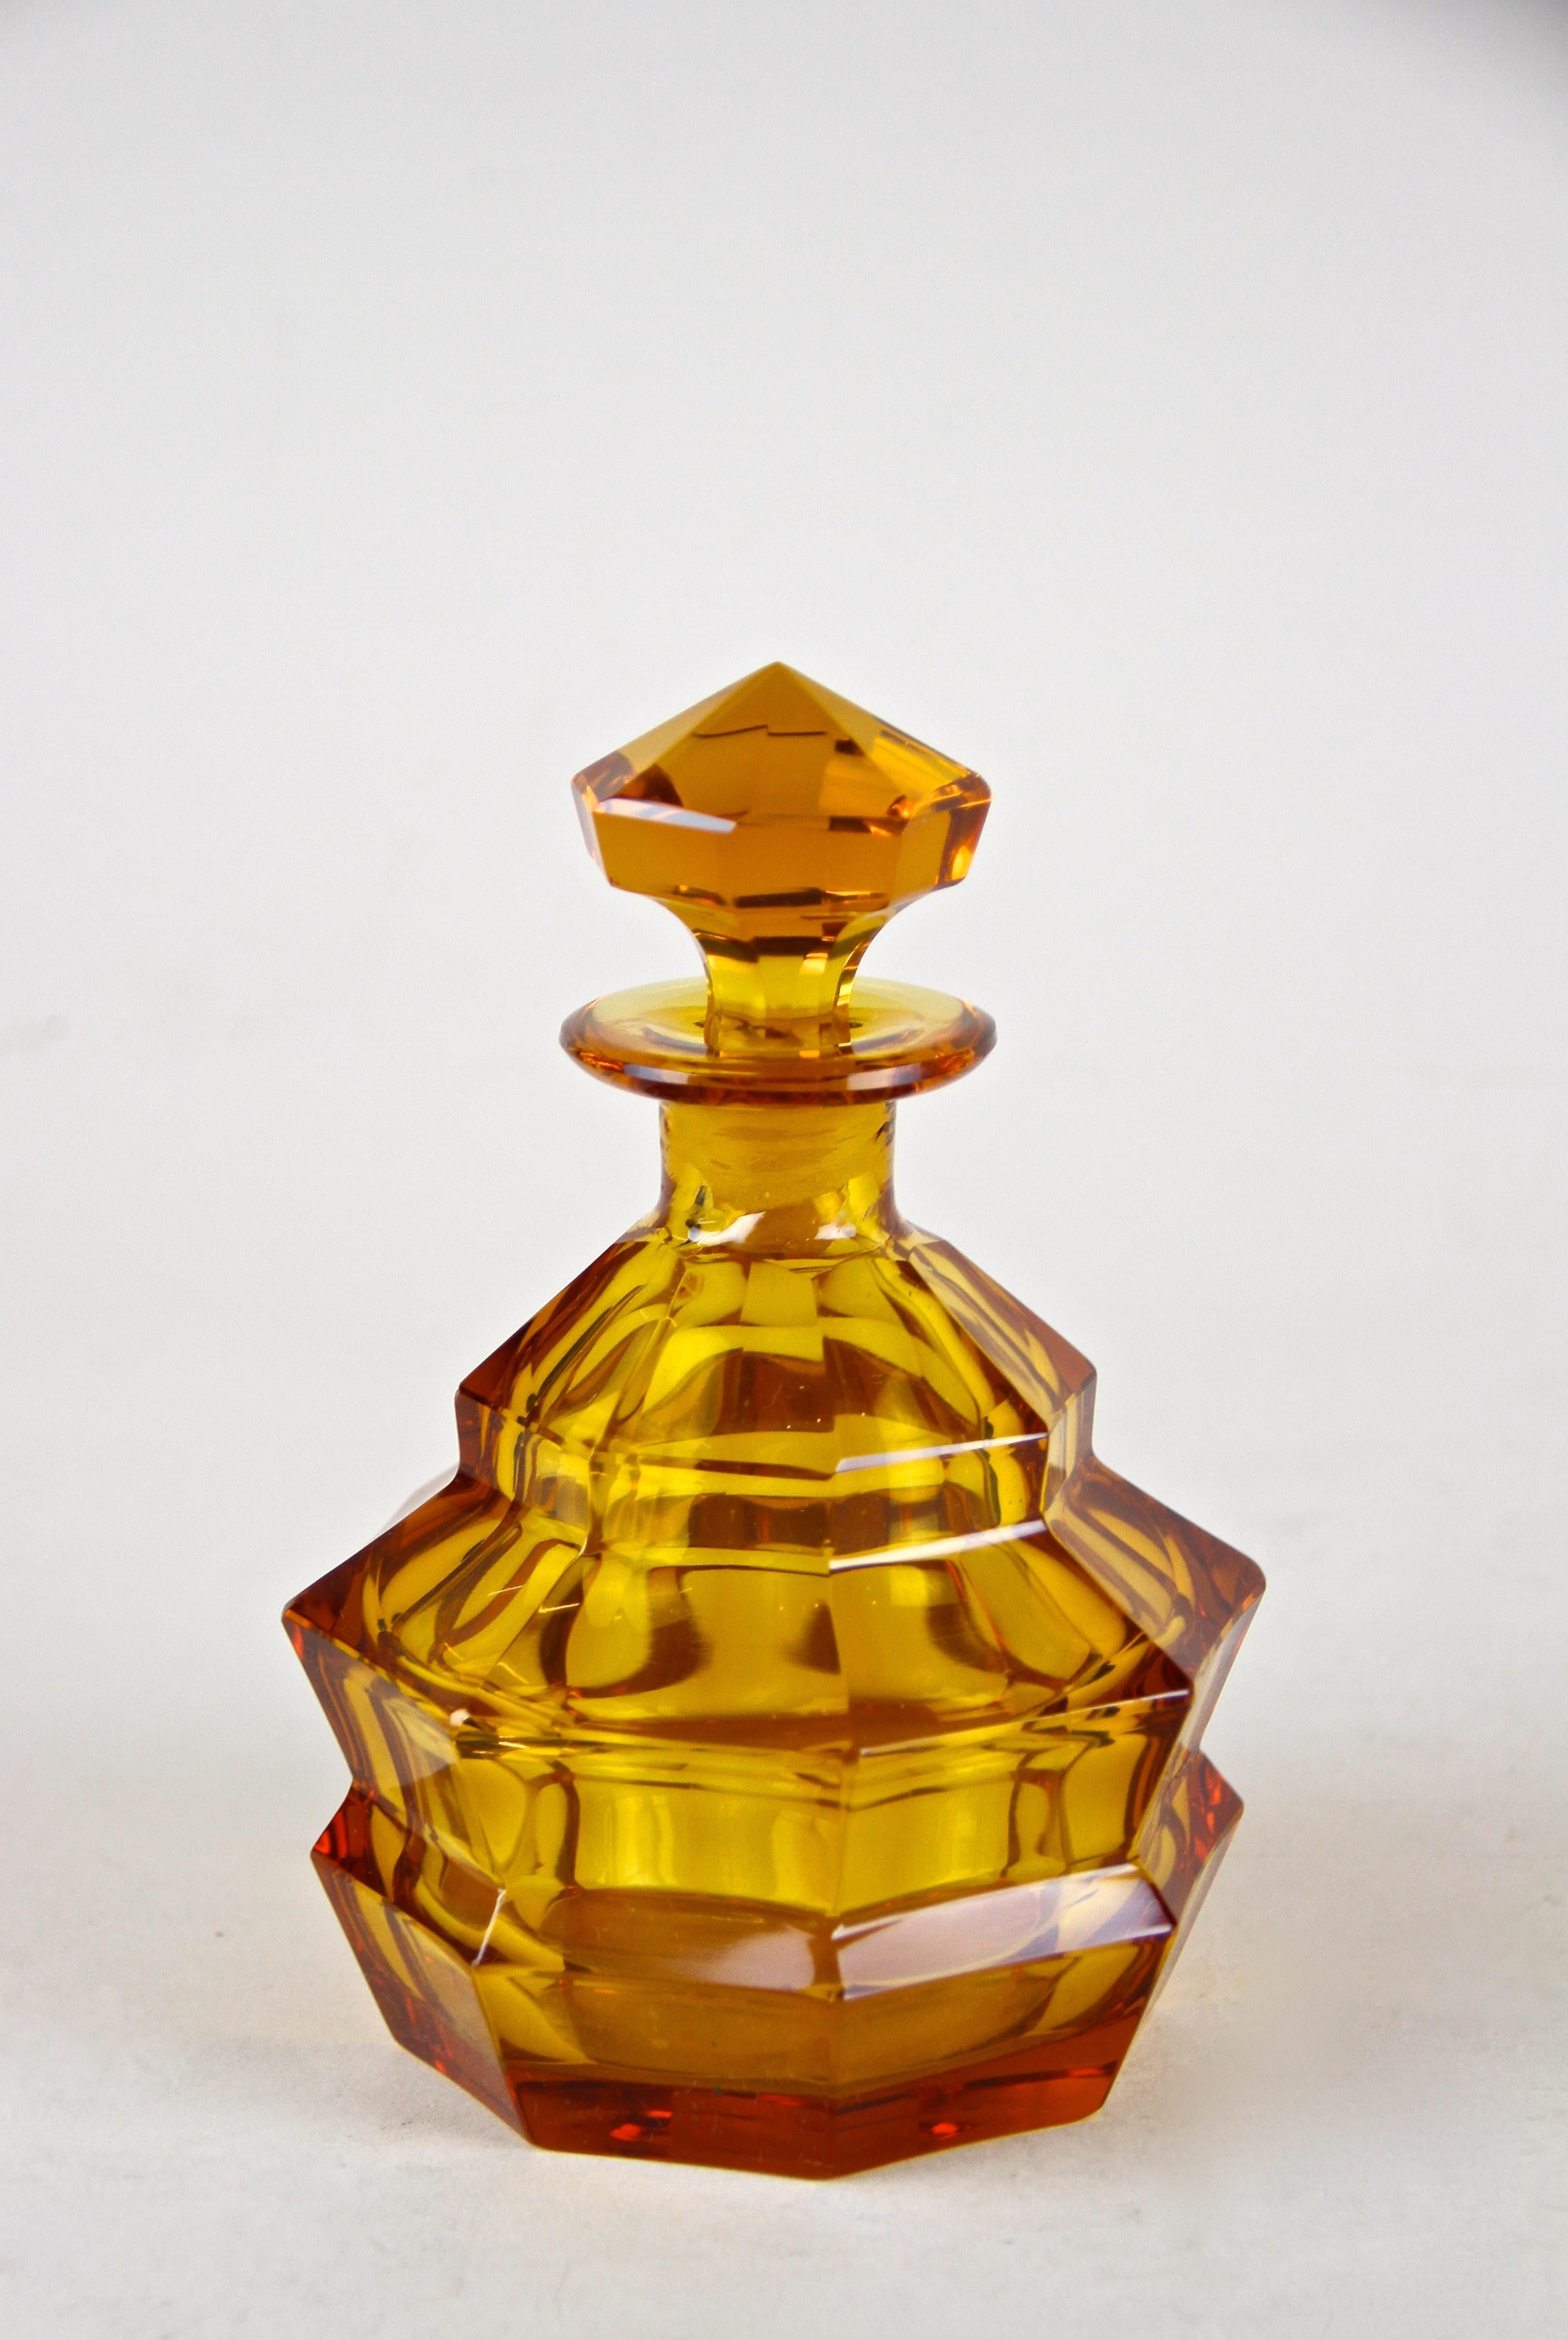 Beautifully designed amber-colored glass bottle from the early Art Deco period around 1920 in Austria. The artfully shaped glass bottle bottle comes with a great looking diamond style stopper. A real lovely piece of Austrian glass art in flawless